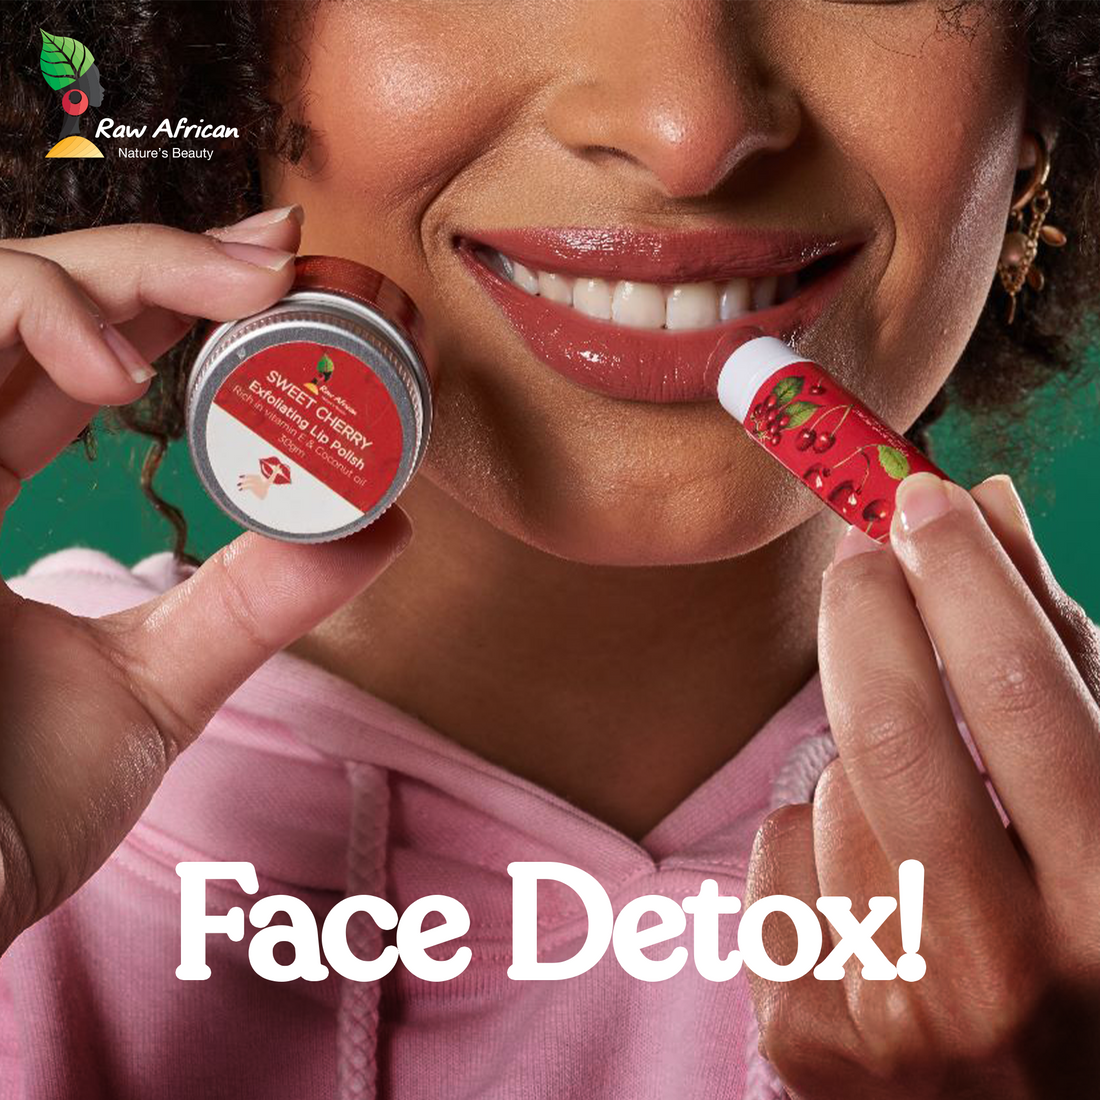 A brand New Year, A brand New You! - Face Detox!